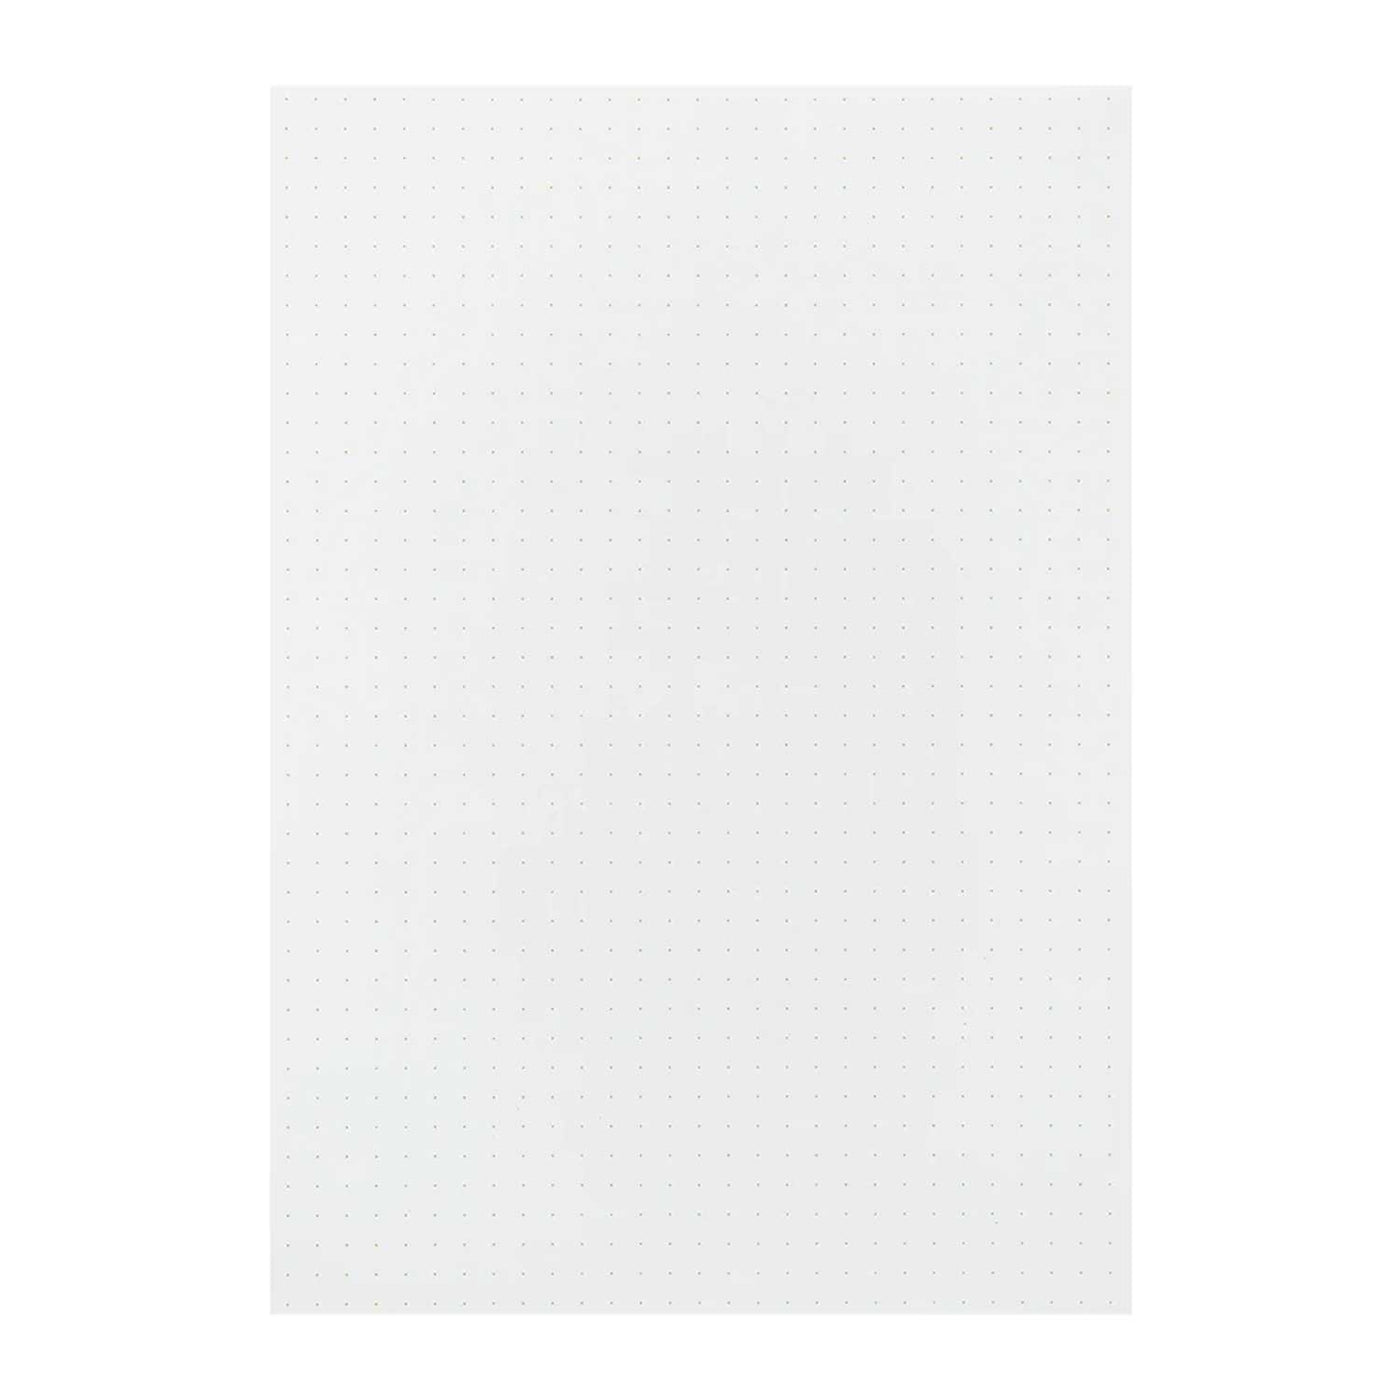 Midori Soft Colour White Notepad - A5, Dotted 3